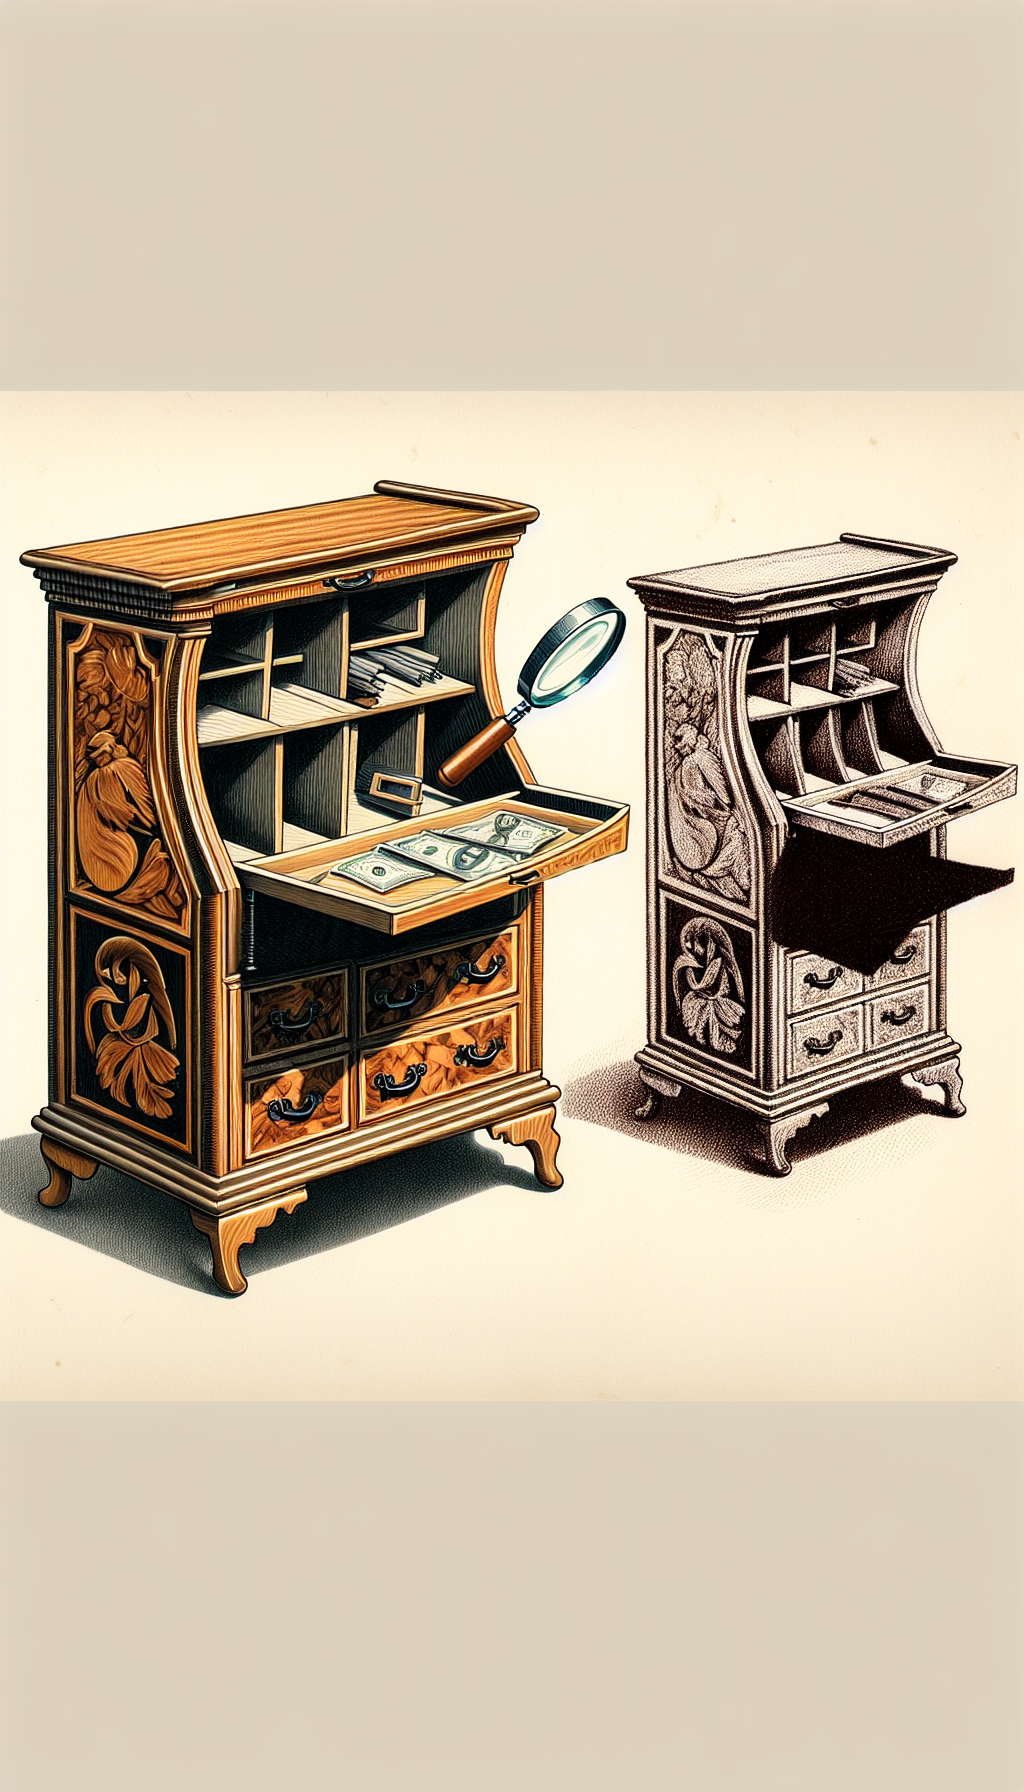 An intricately detailed drawing of half an antique drop-front secretary desk, with fine wood grain and artful inlay, contrasts sharply with its mirror image, faded and with a broken hinge. The divide shows a magnifying glass over one section, highlighting craftsmanship, while a dollar sign shadow looms over the deteriorated half, signifying value loss.